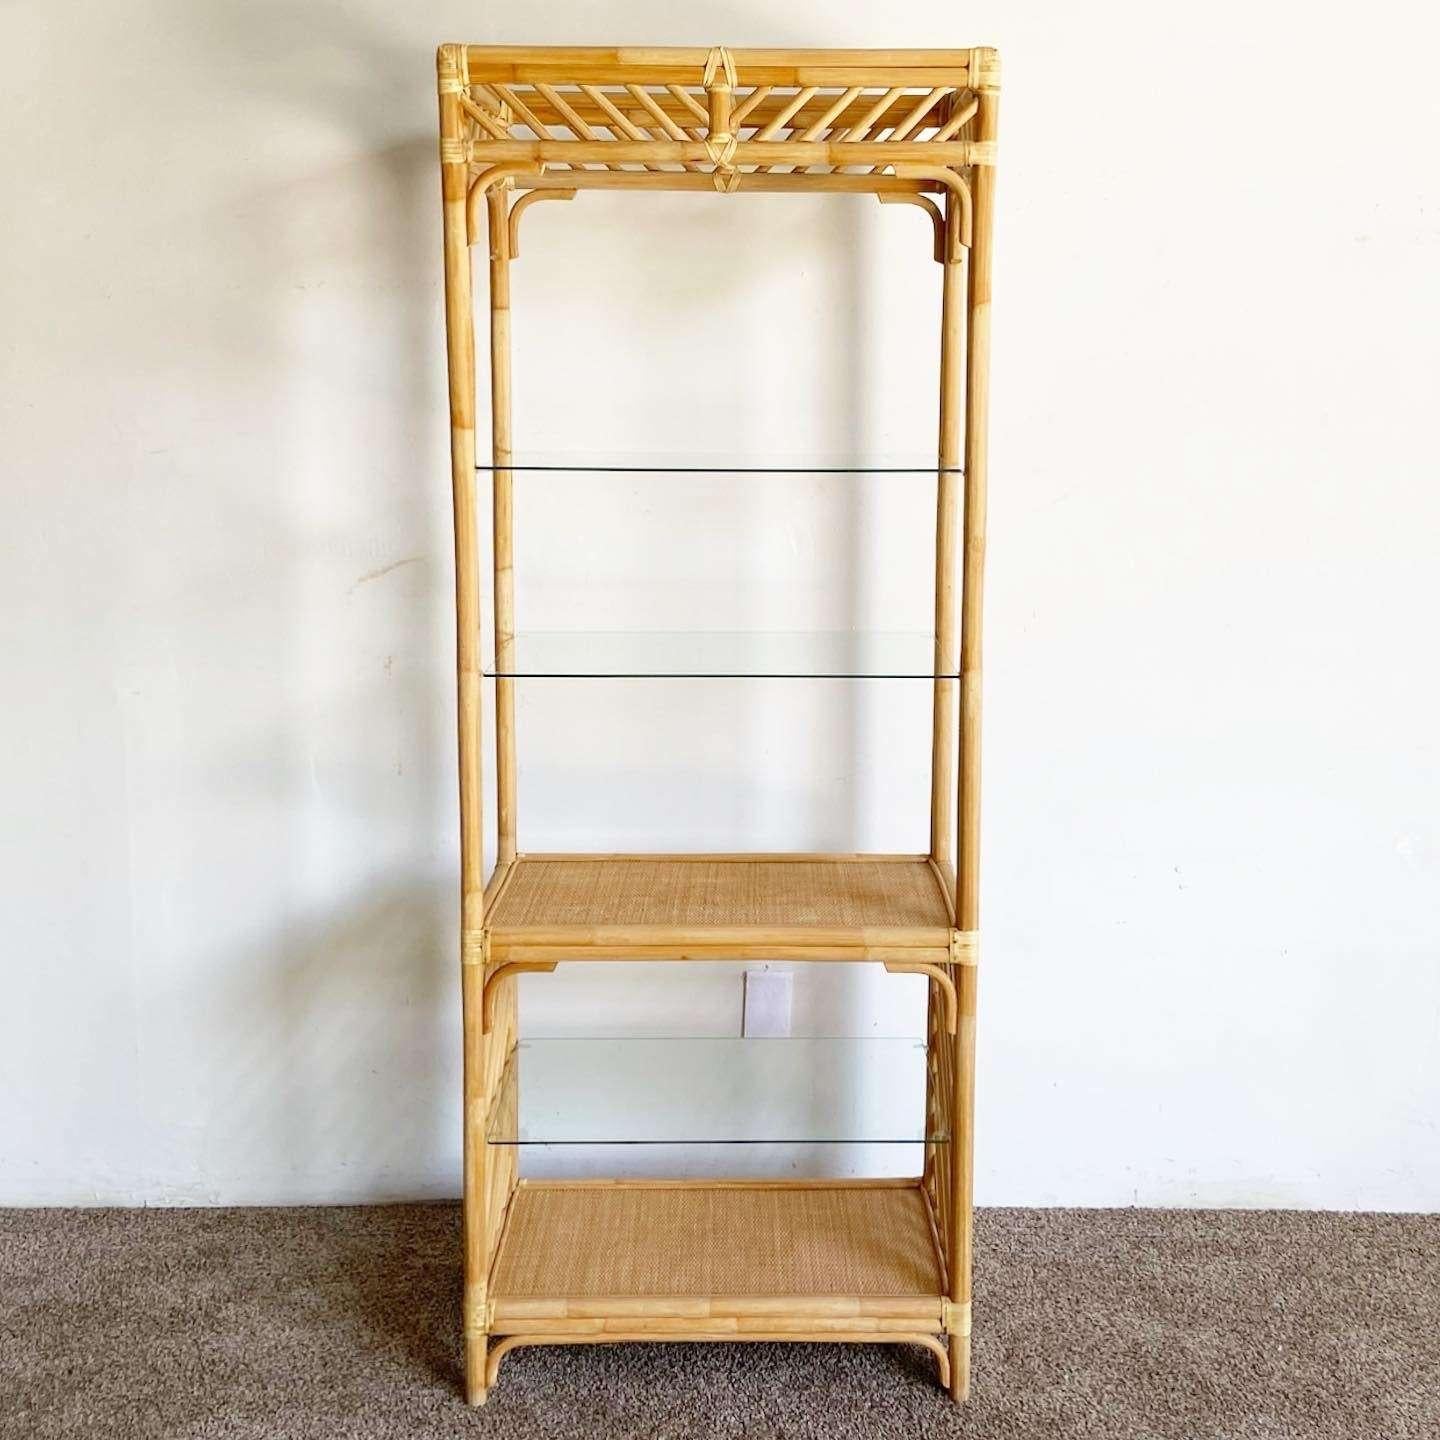 Wonderful vintage bohemian bamboo rattan Etagere. Features a fantastic construction with 3 glass shelves.
